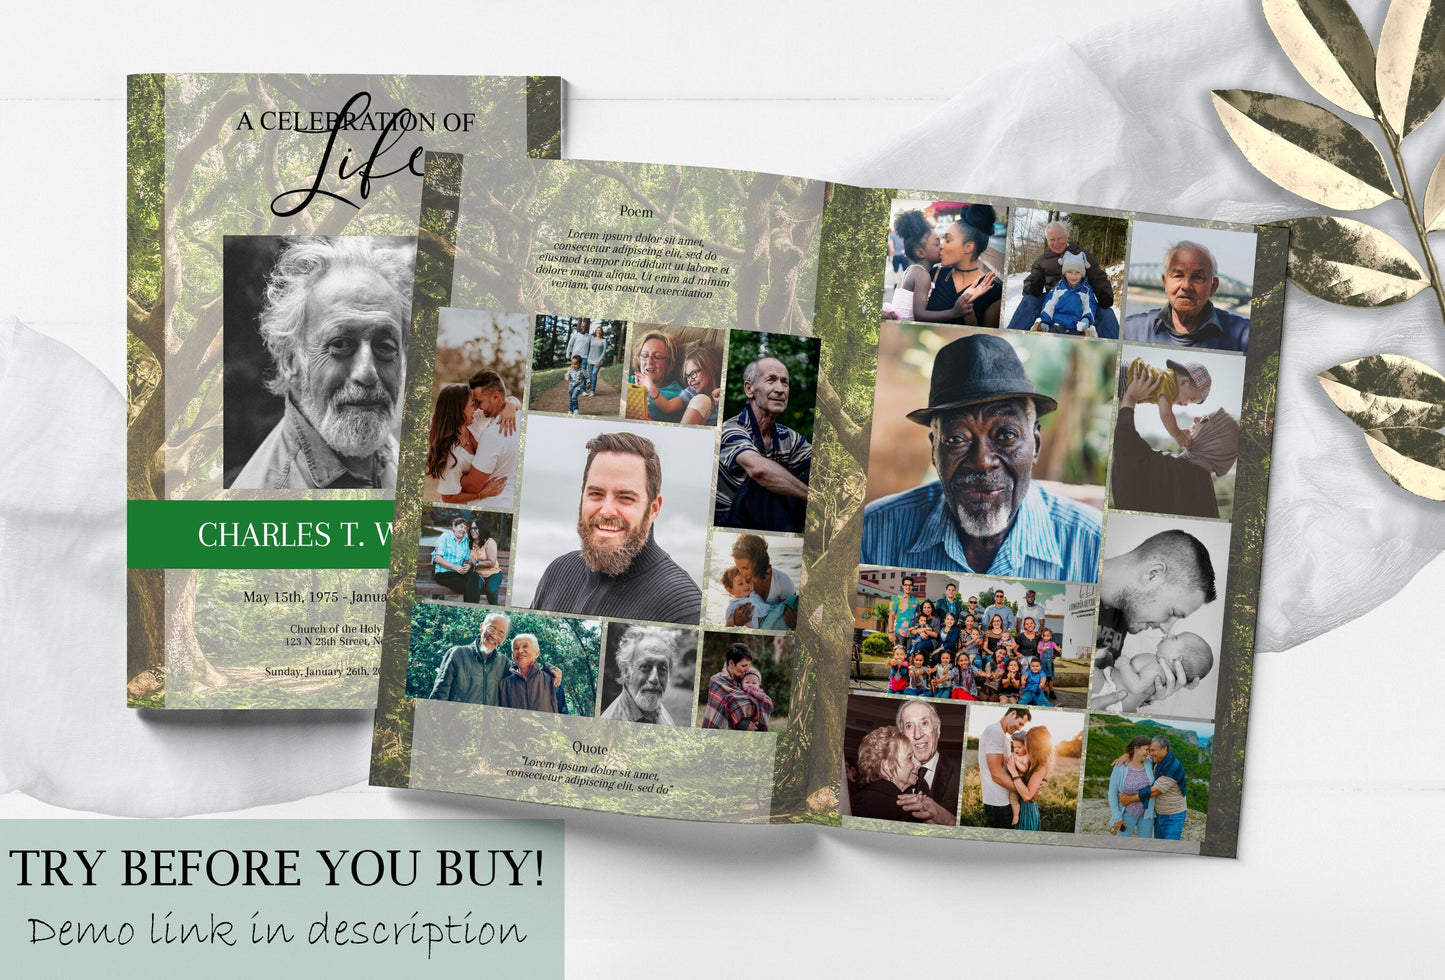 Forest Theme Funeral Service Program Template - 8 Page